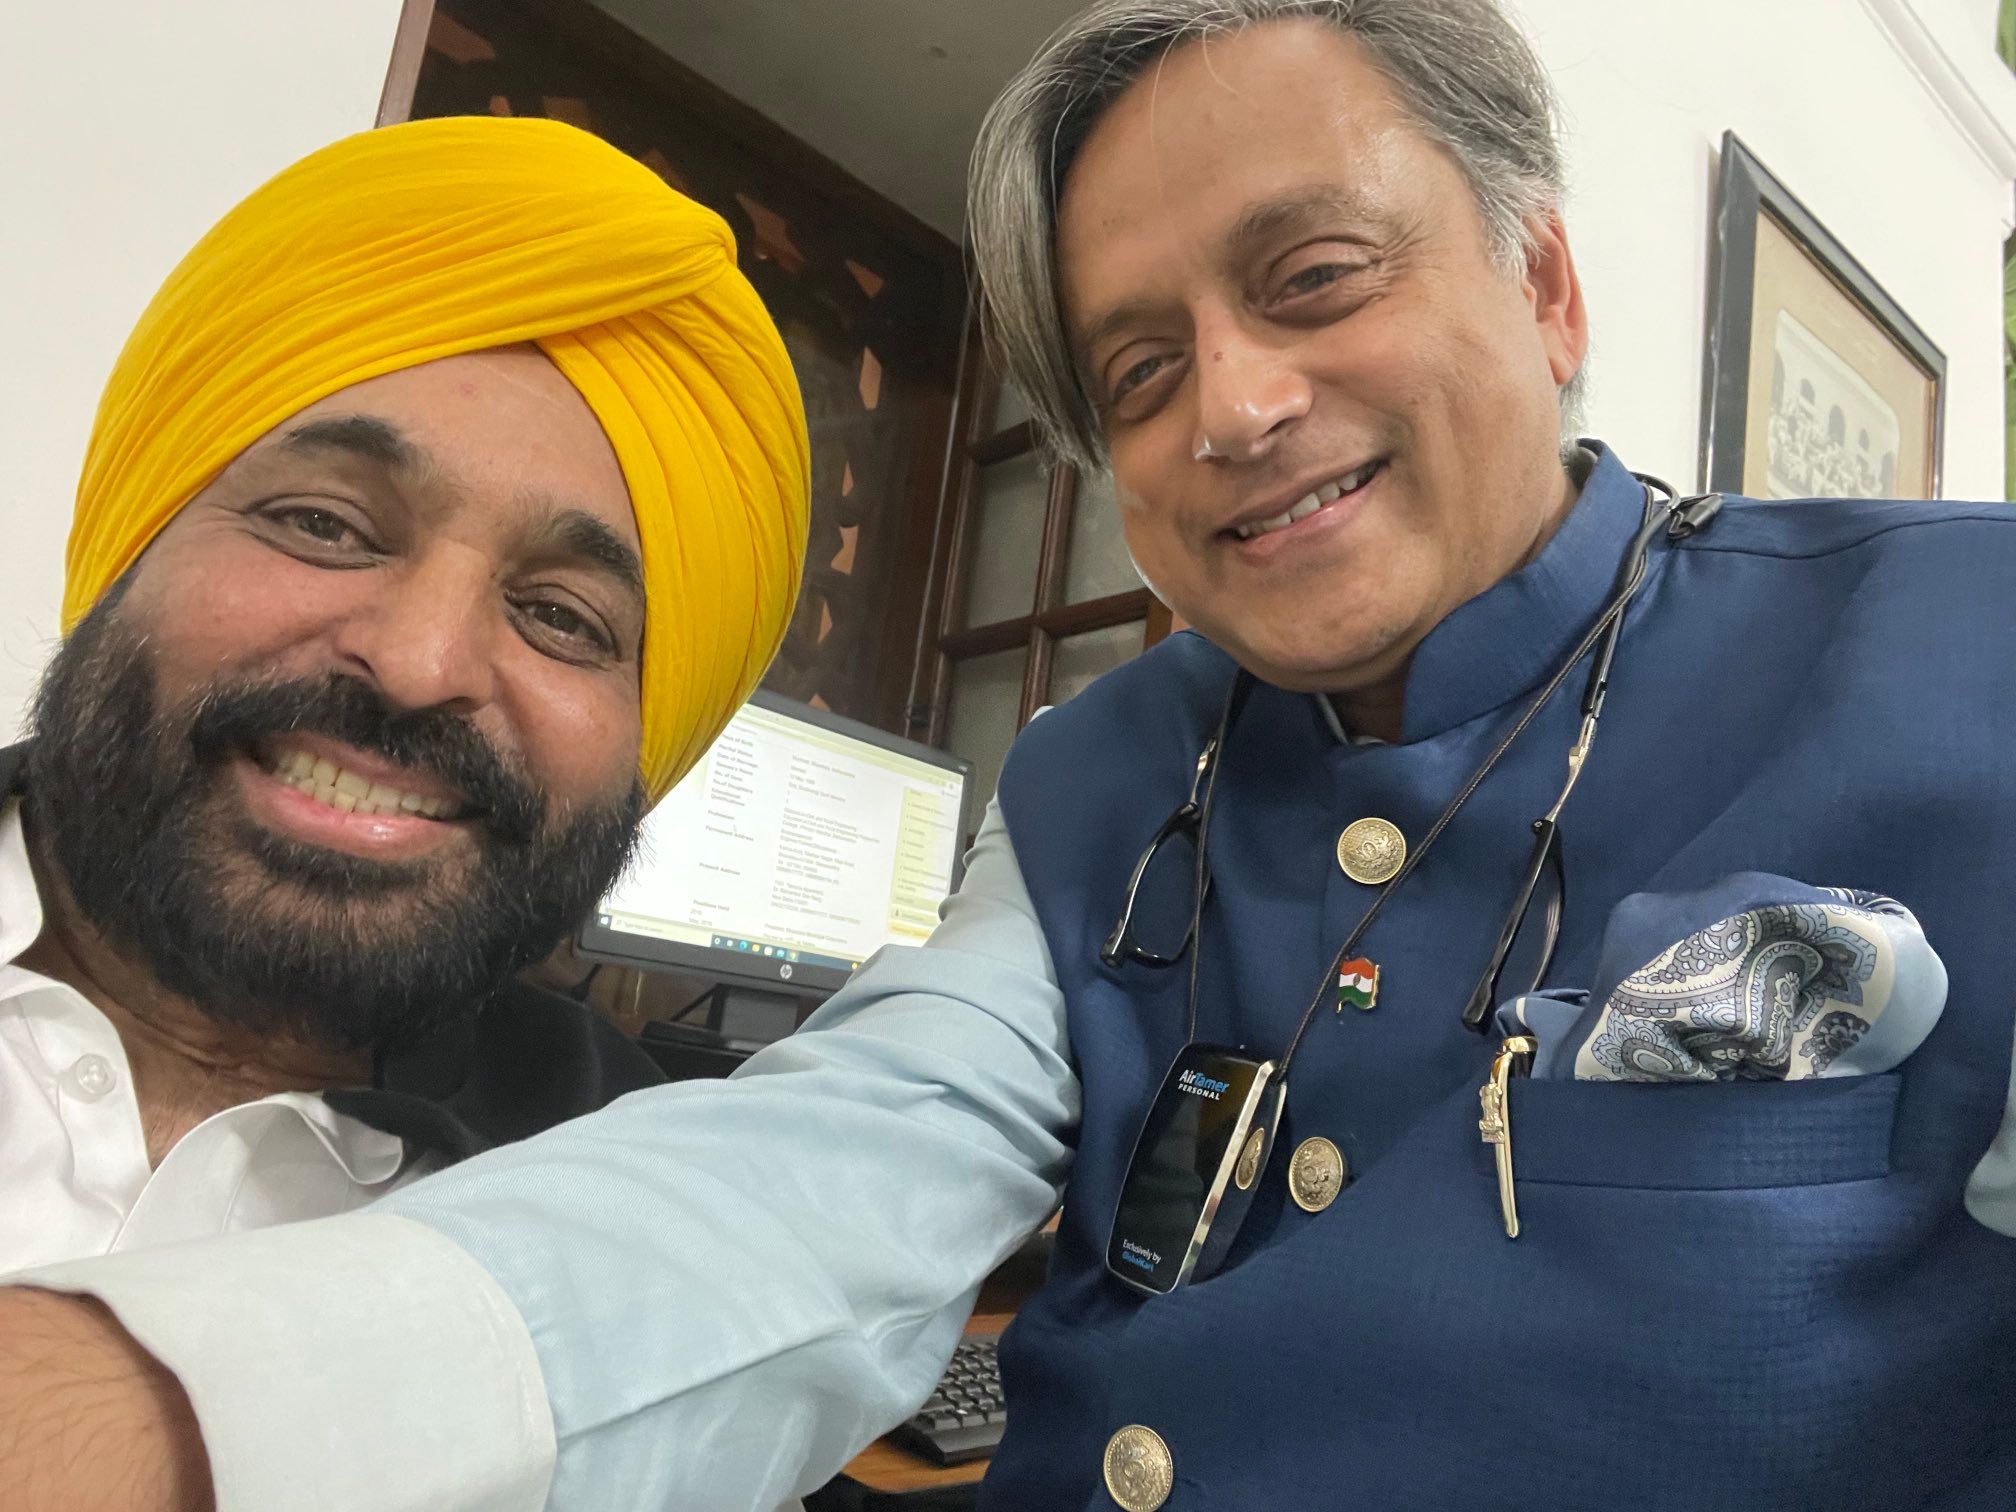 Shashi Tharoor back with ‘Parliamentary camaraderie’, this time with Punjab’s Bhagwant Mann